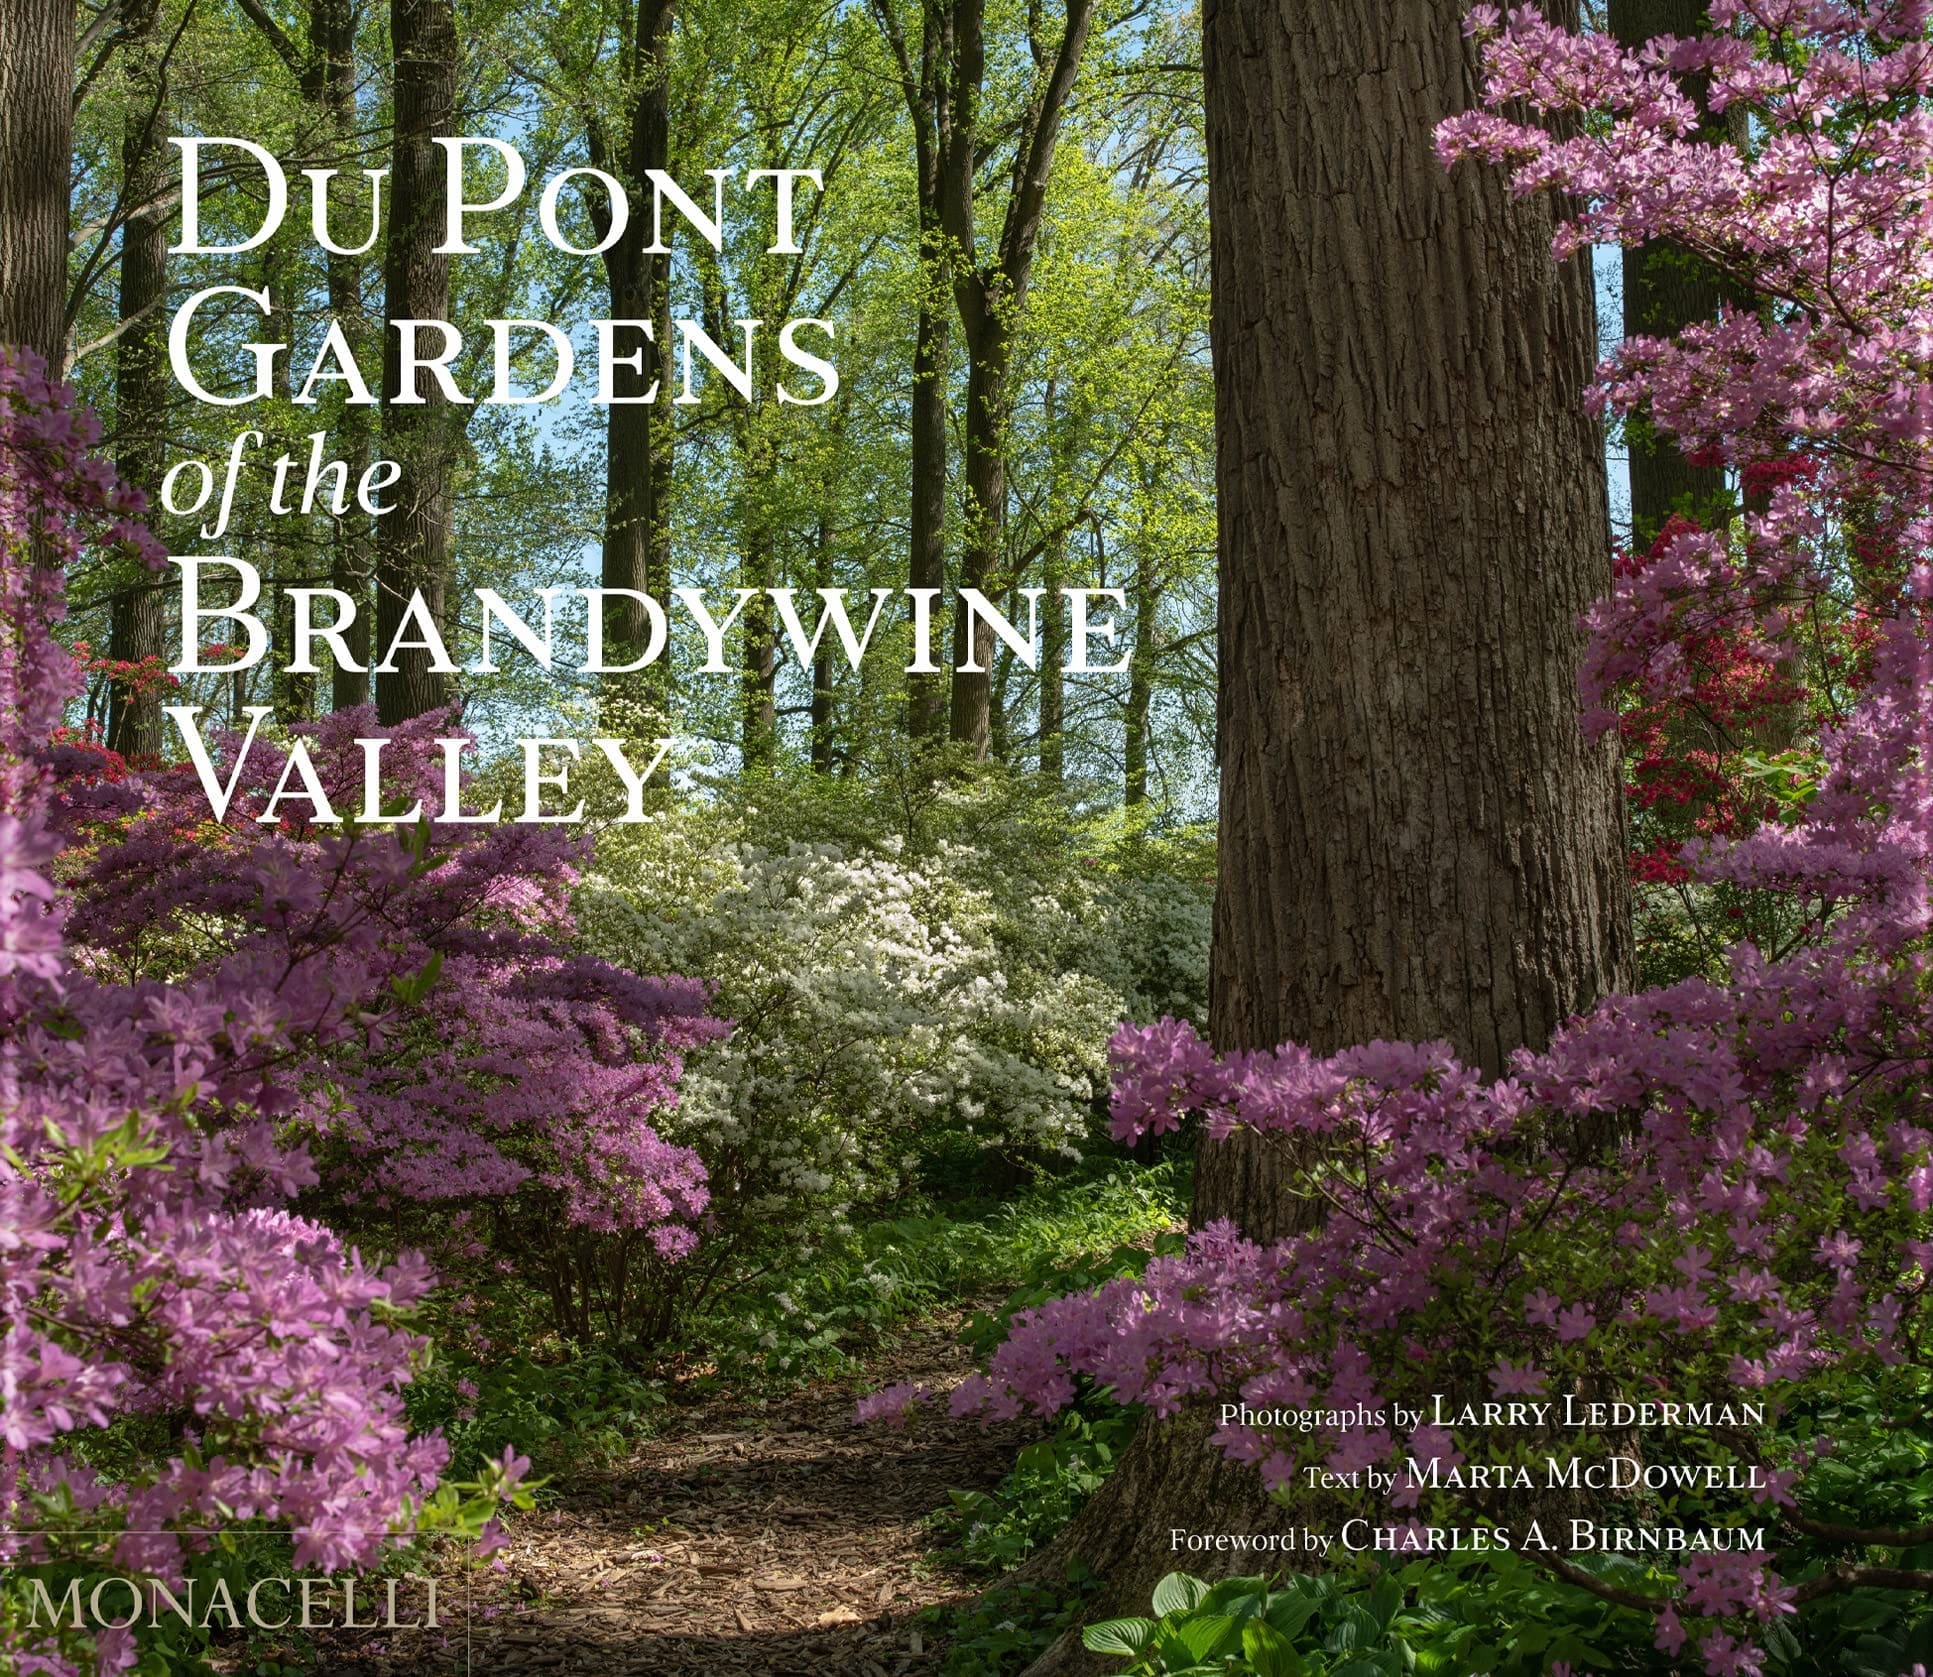 Featured image for “5 area du Pont gardens celebrated in new book”